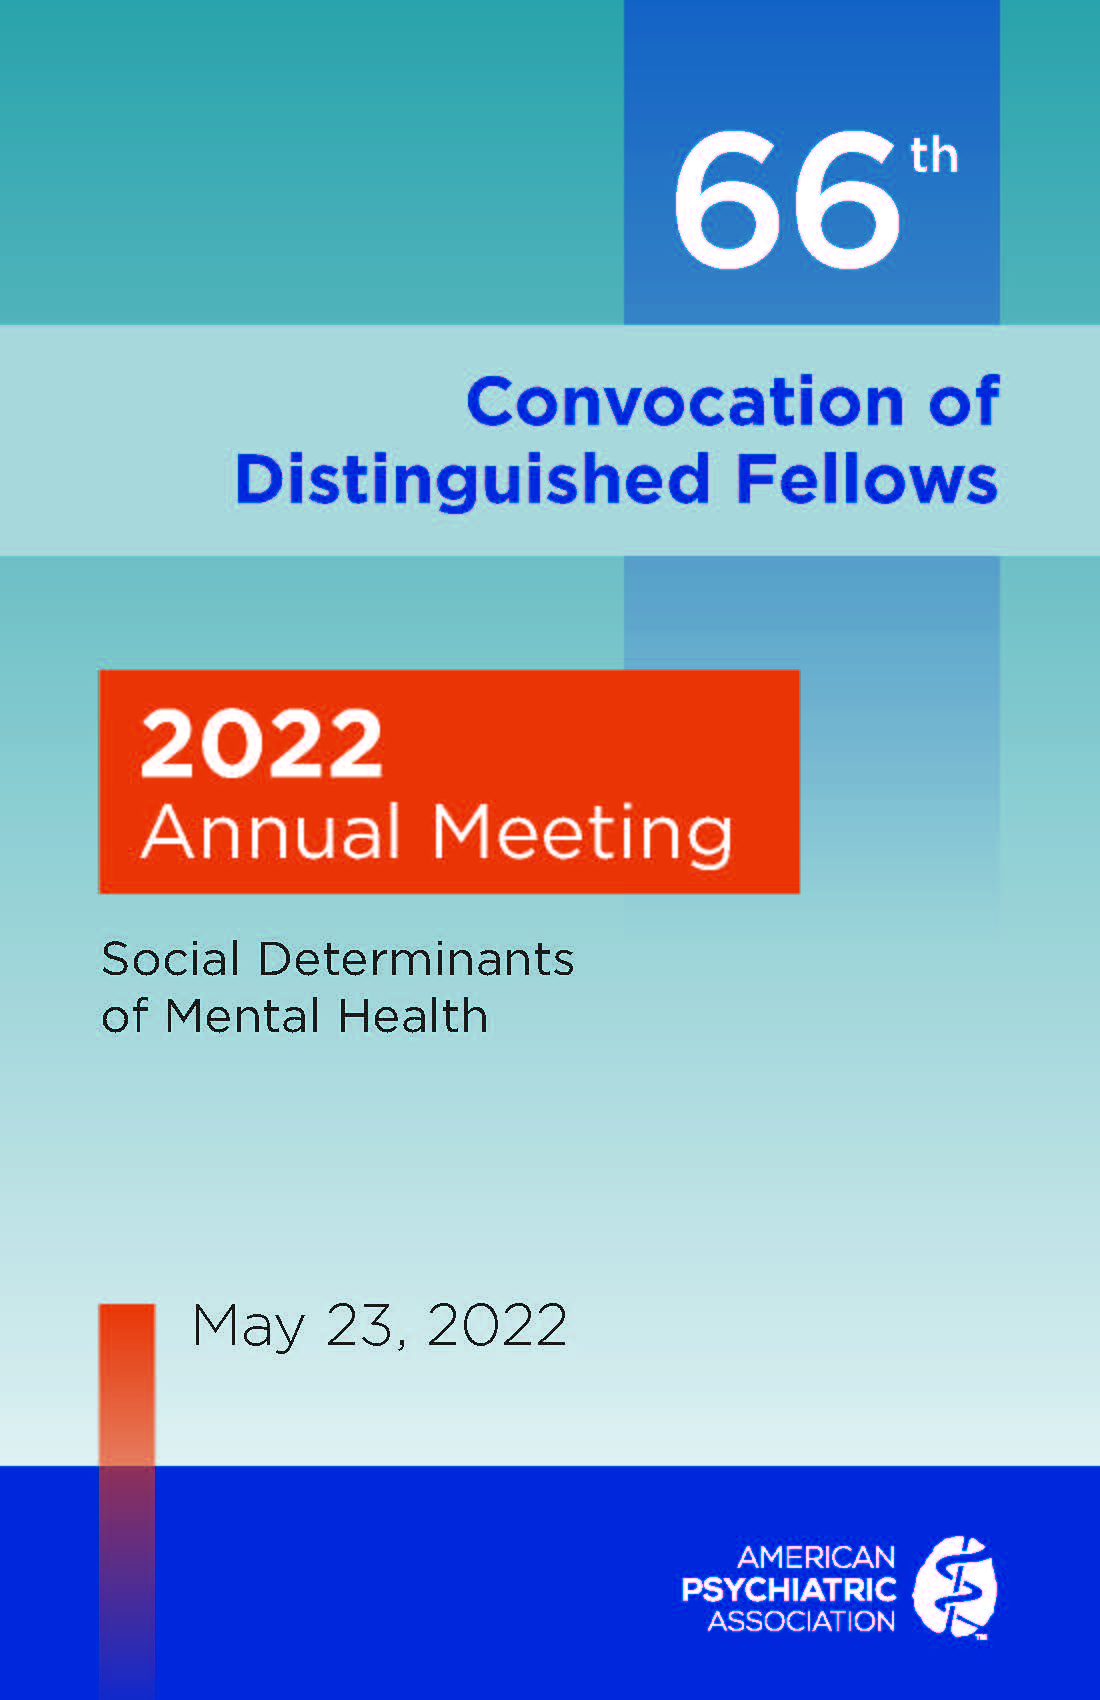 2022 Convocation of Distinguished Fellows Program Guide